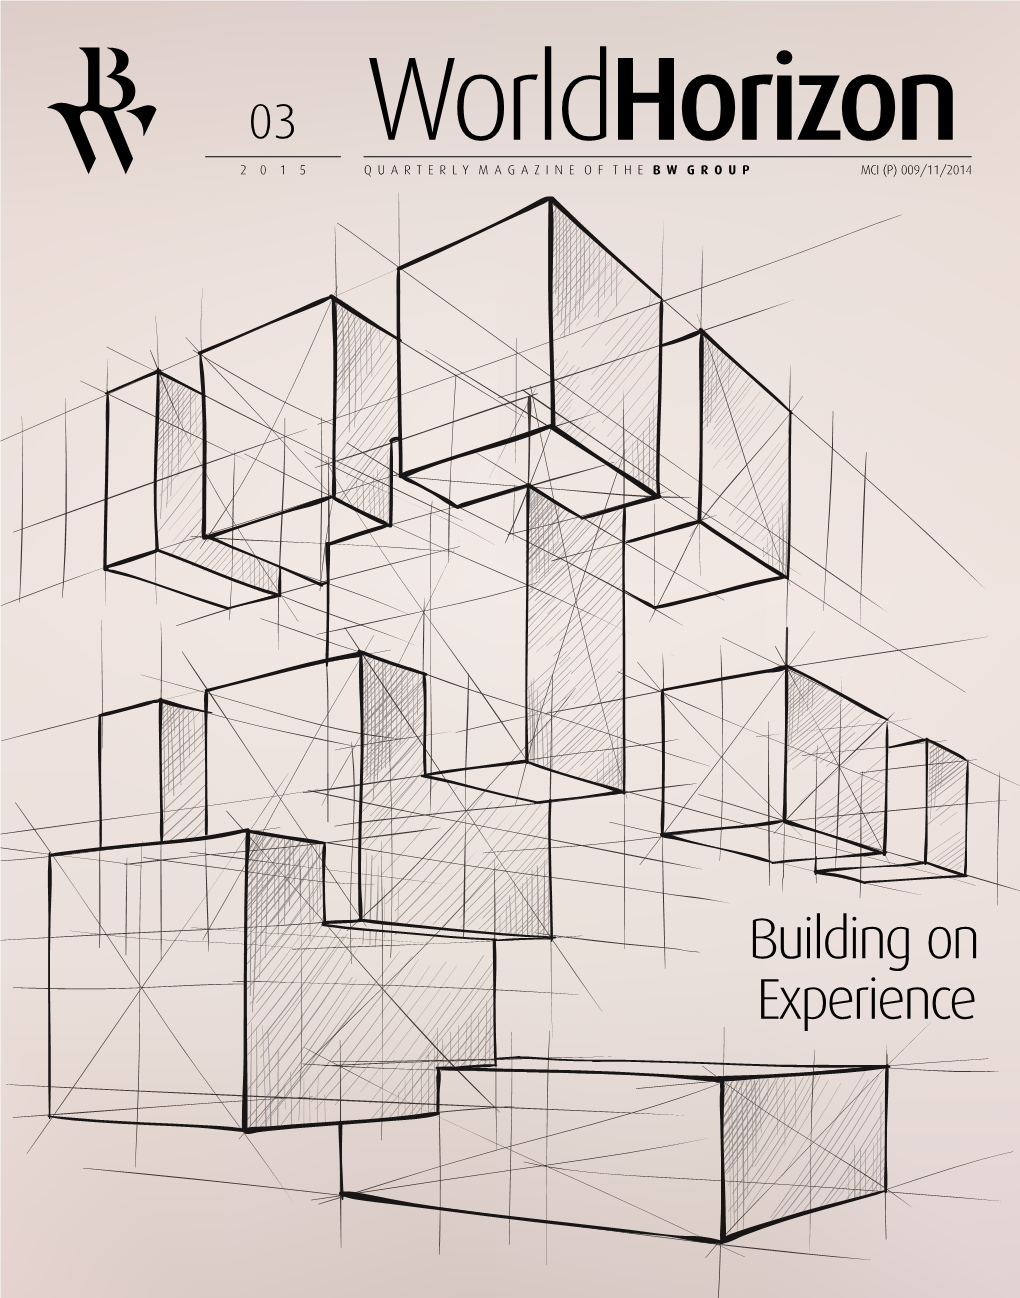 Building on Experience Editorial